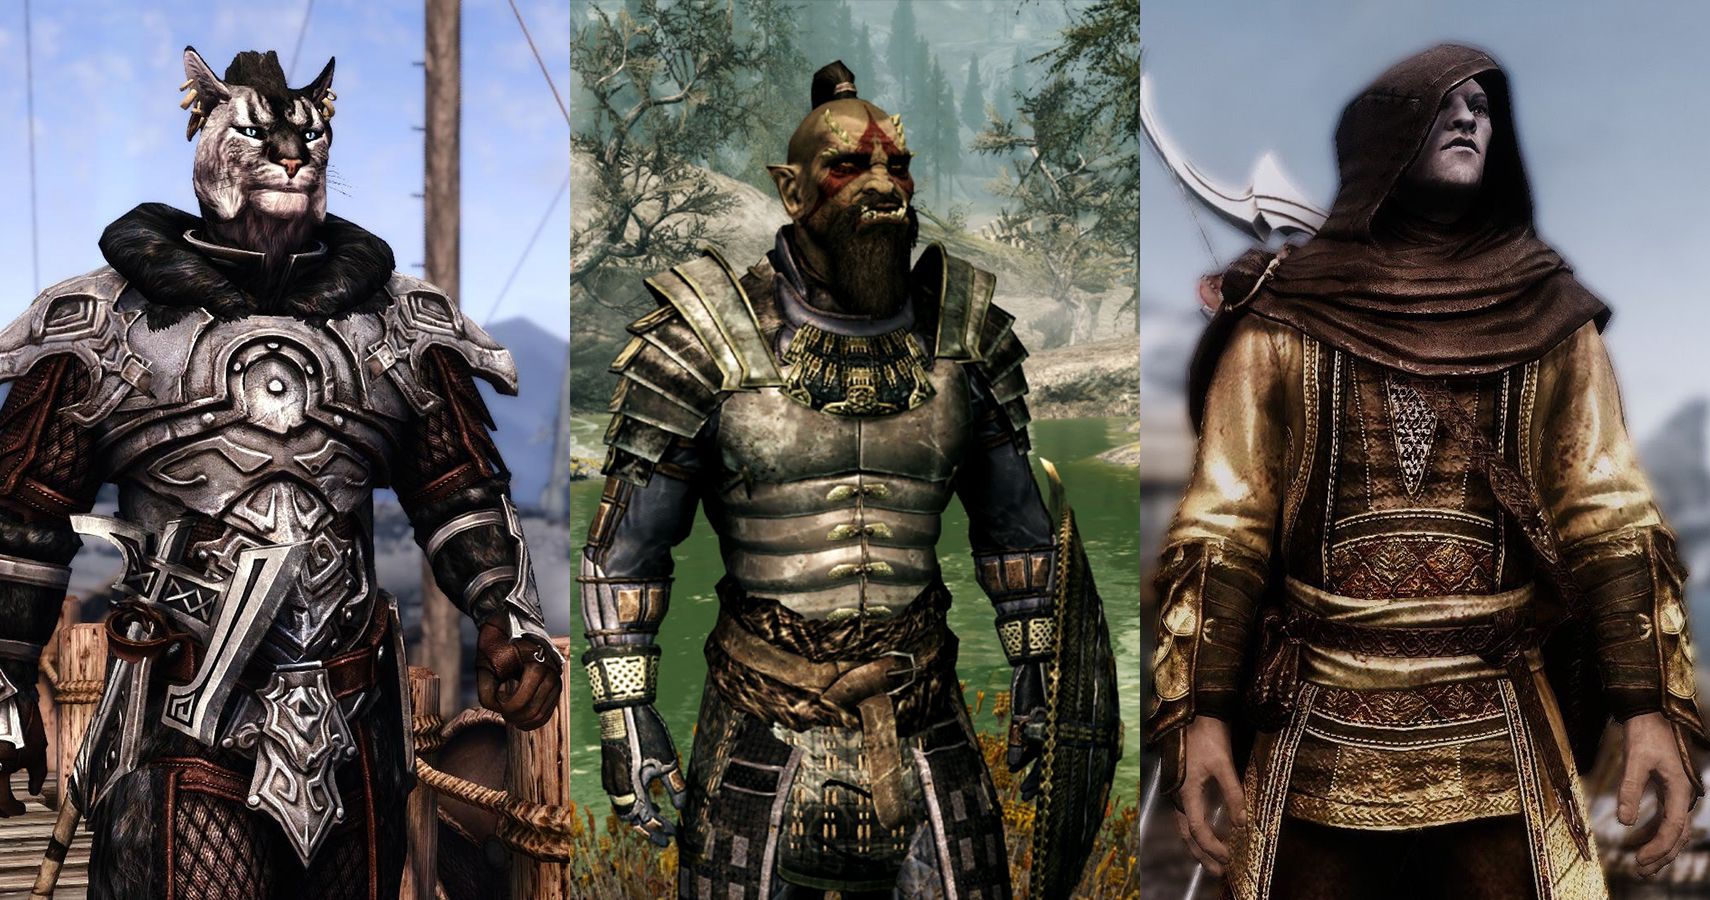 Skyrim: Which Race Should You Pick Based On Your D&D Moral Alignment?